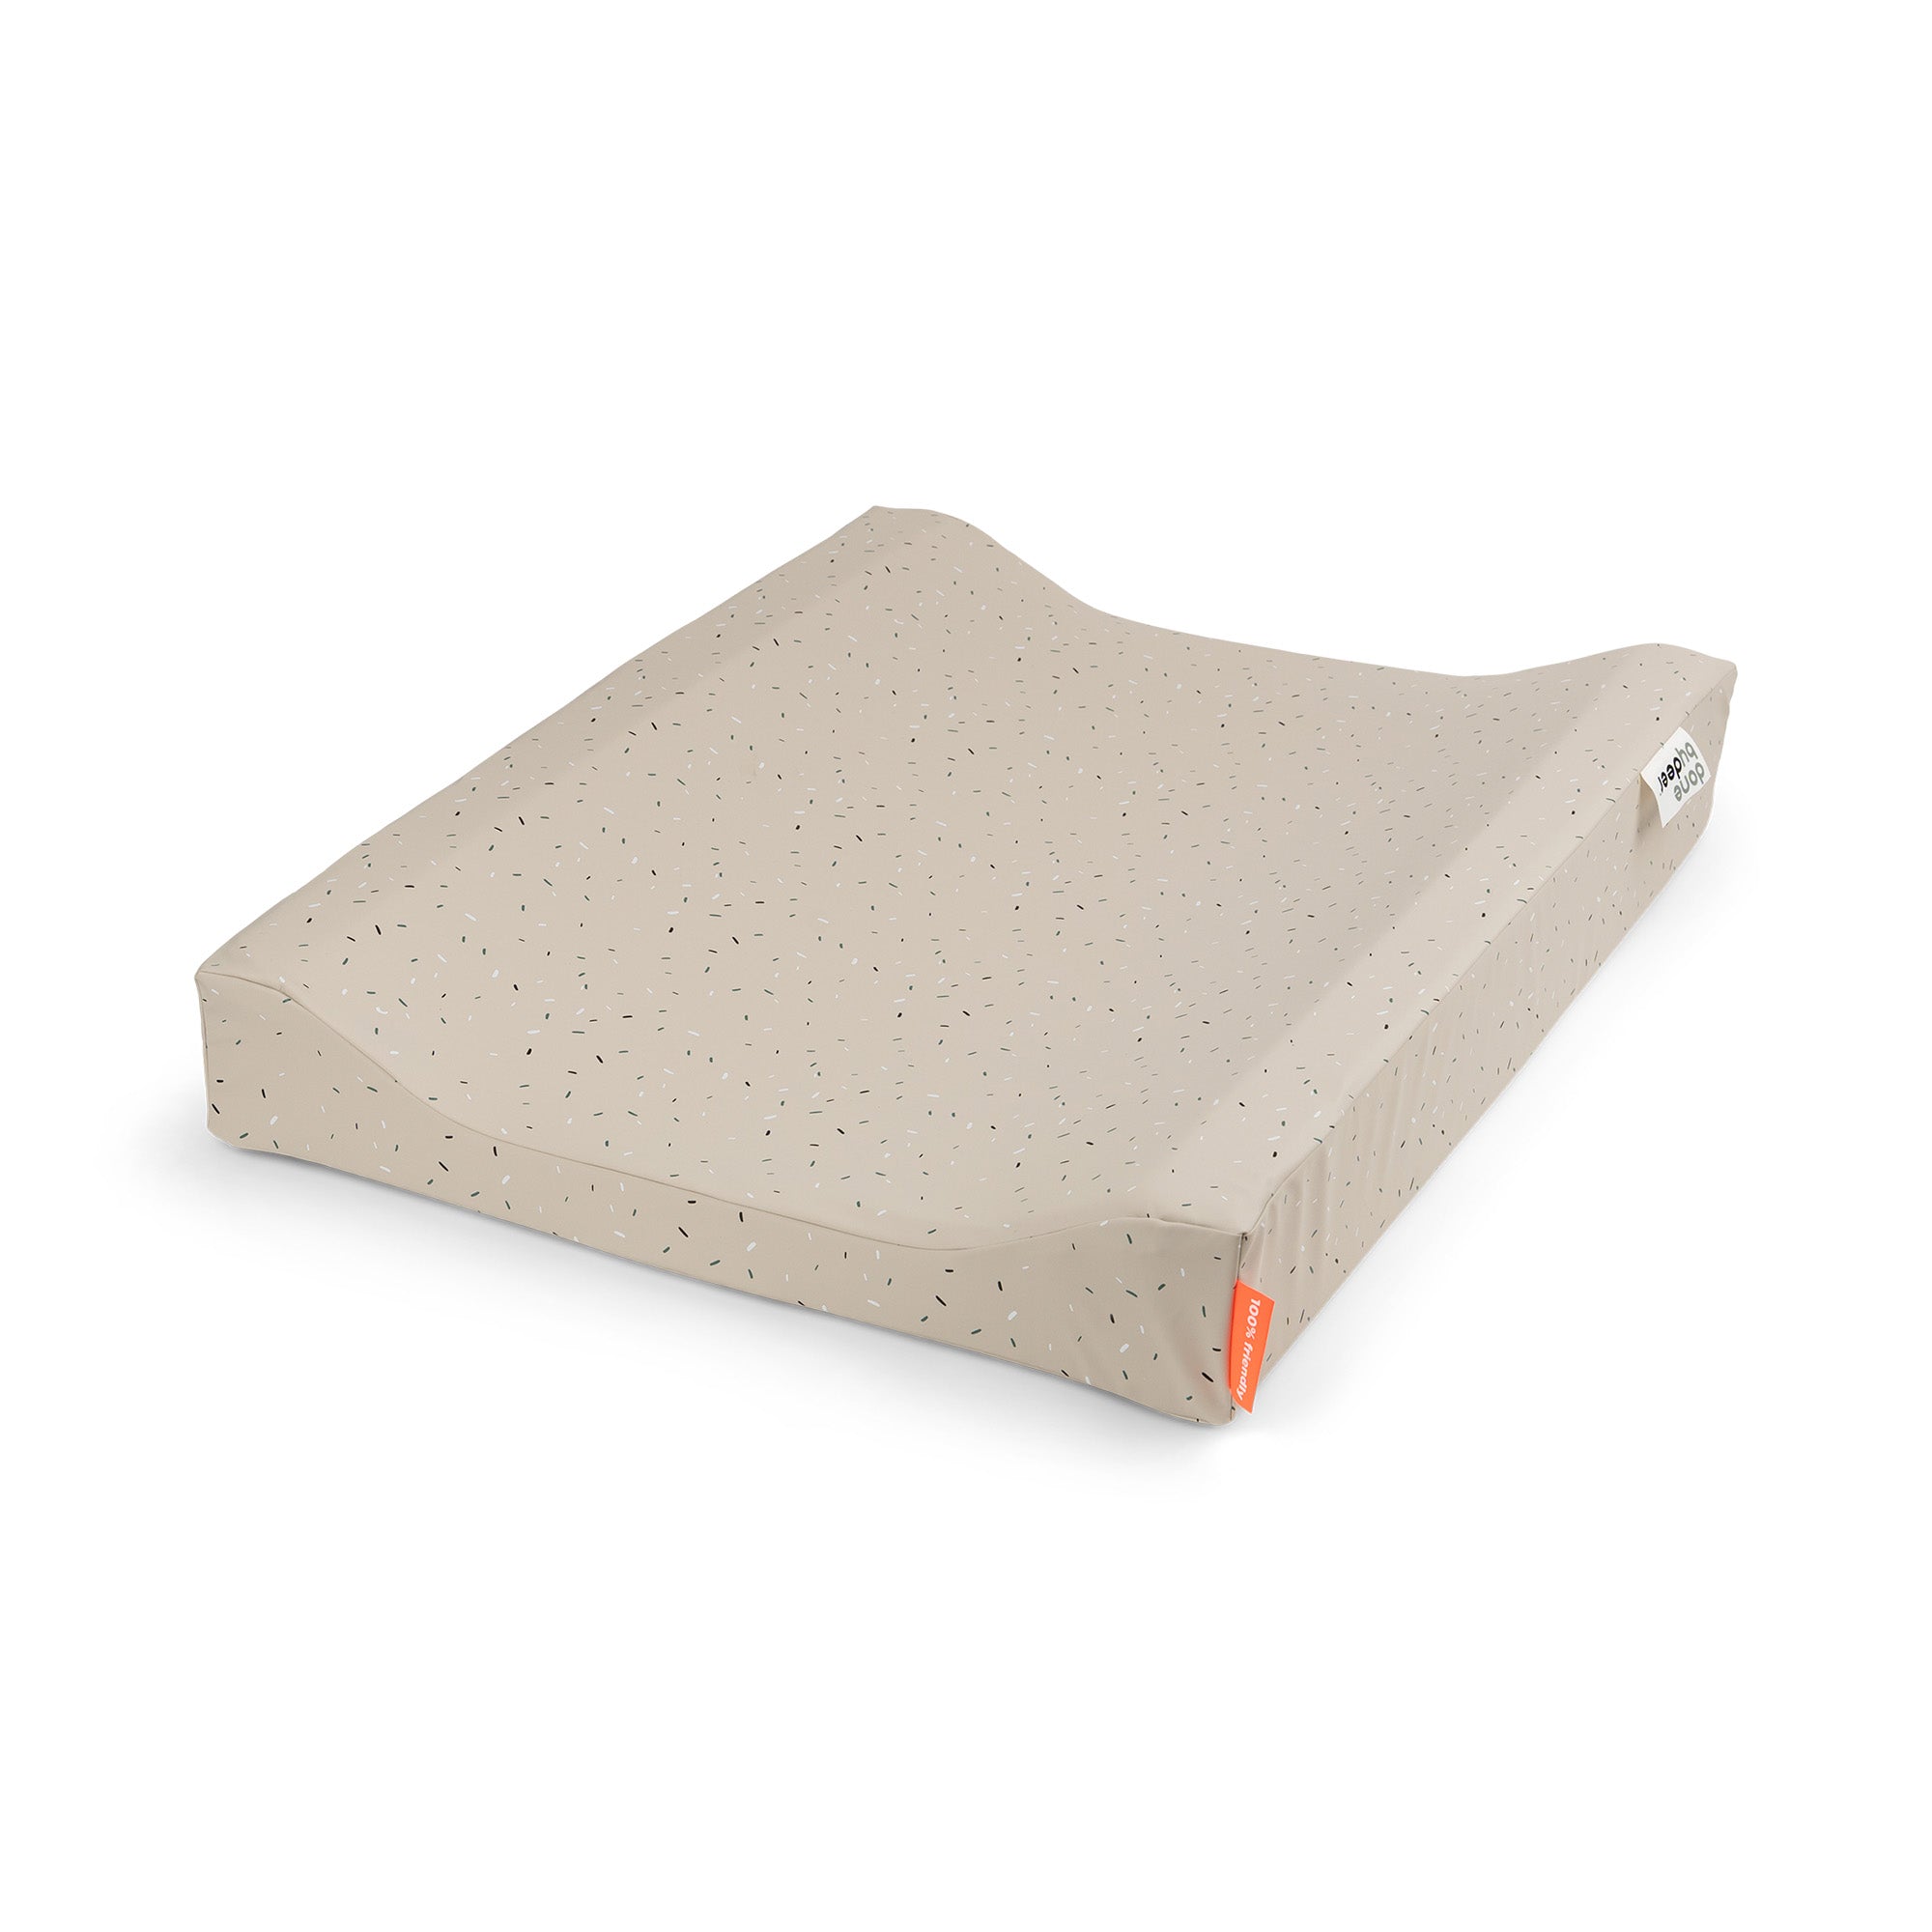 Changing pad easy wipe - Confetti - Sand